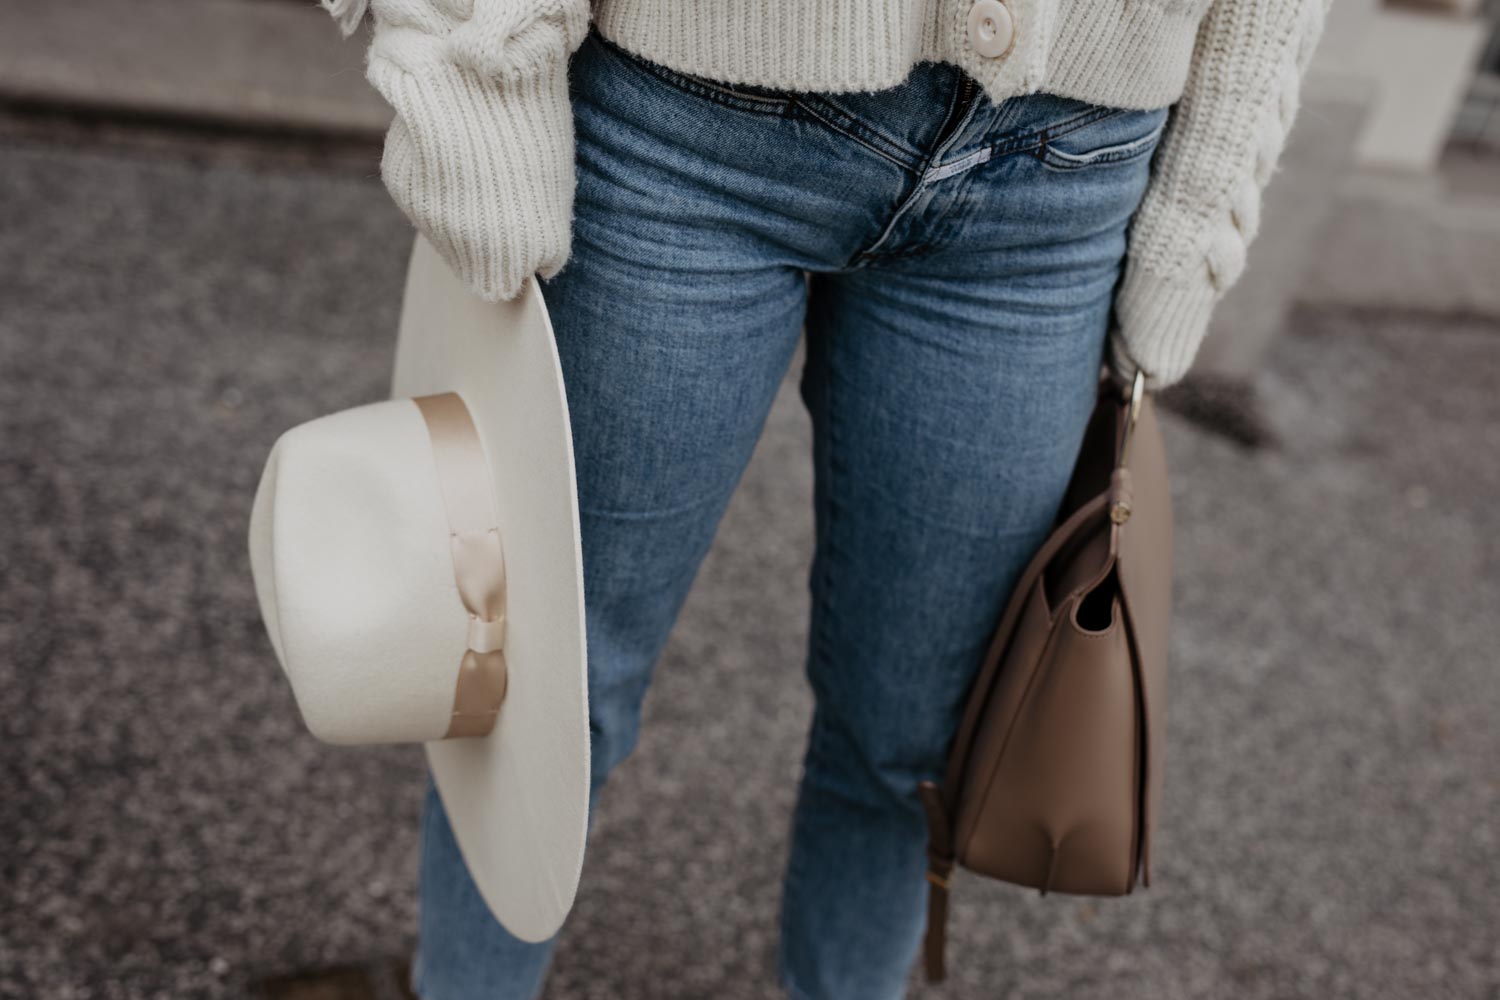 Outfit: J'adore - Closed Jeans, Lack Of Color Hat, Isabel Marant Nowles Boots, Edited Sweater, Aigner Lexi Bag | You rock my life - ninawro